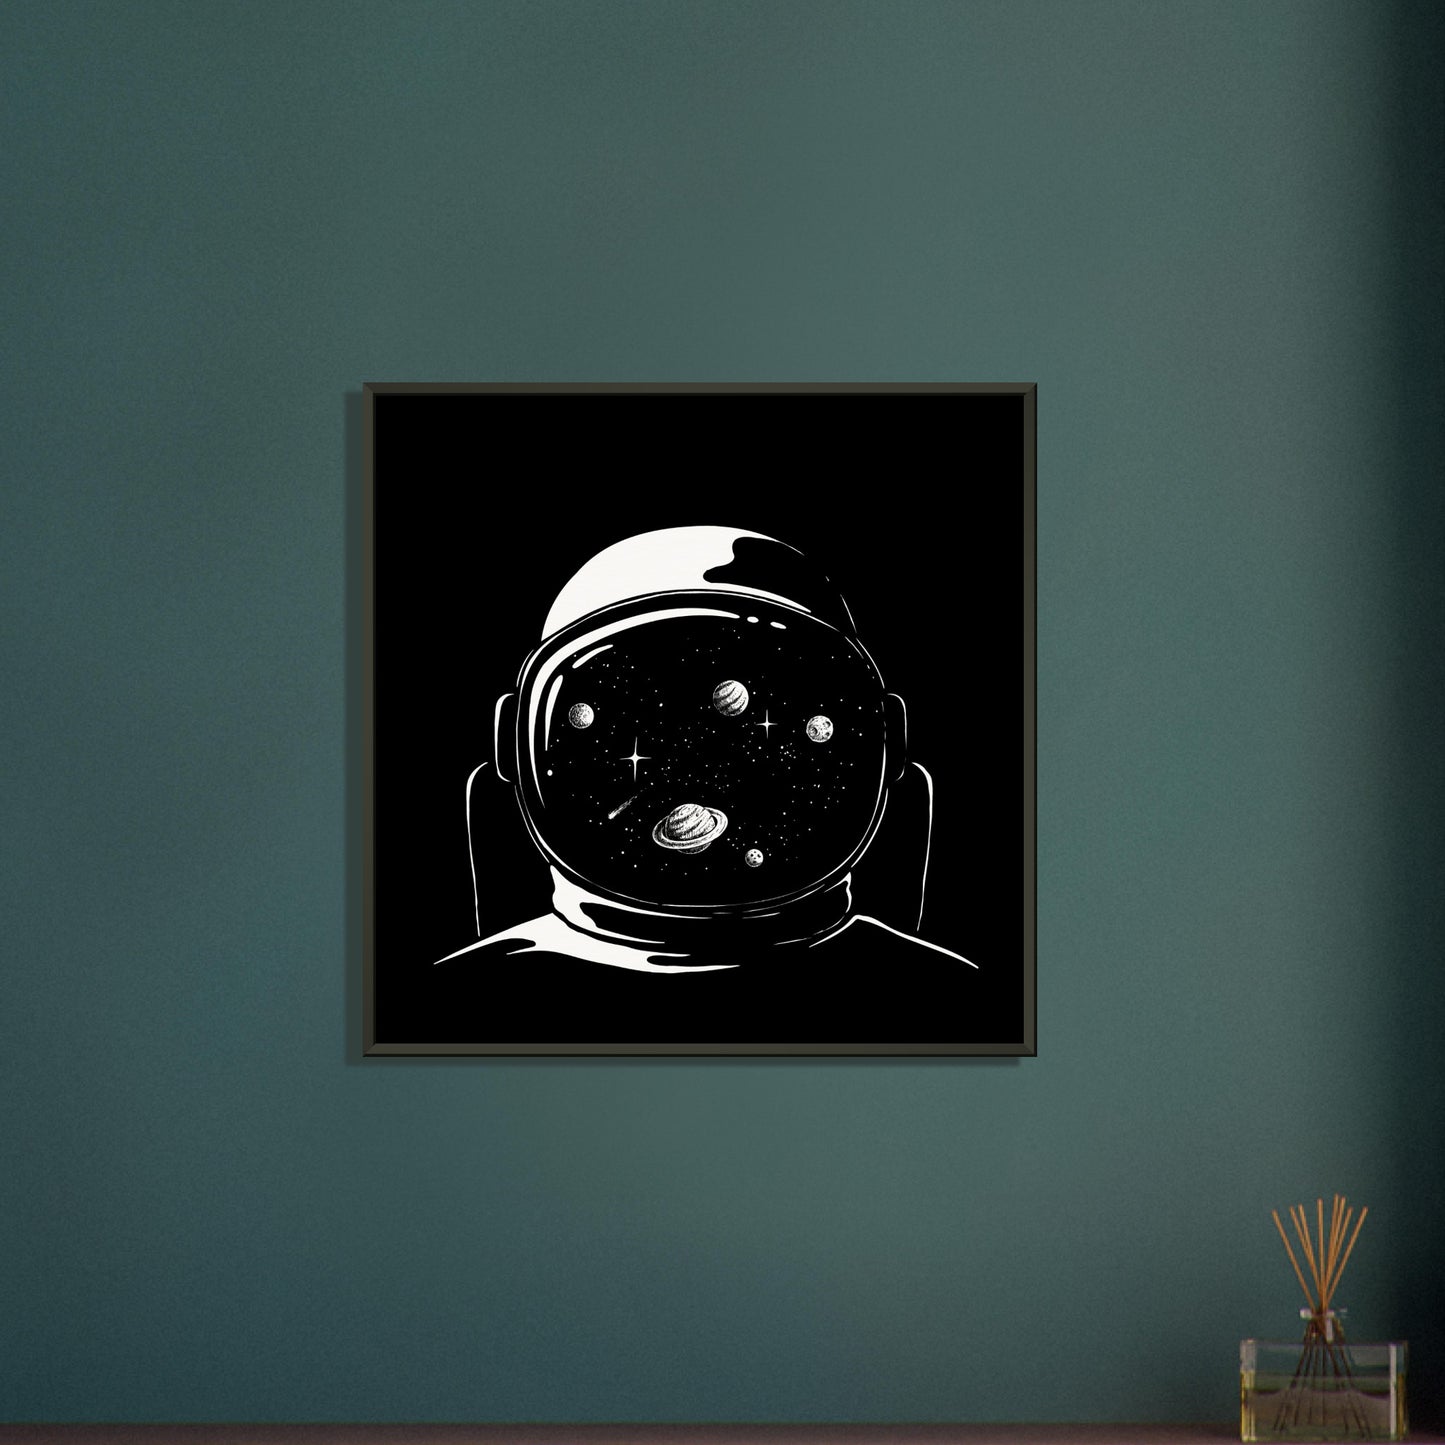 Space reflection in an astronauts helmet